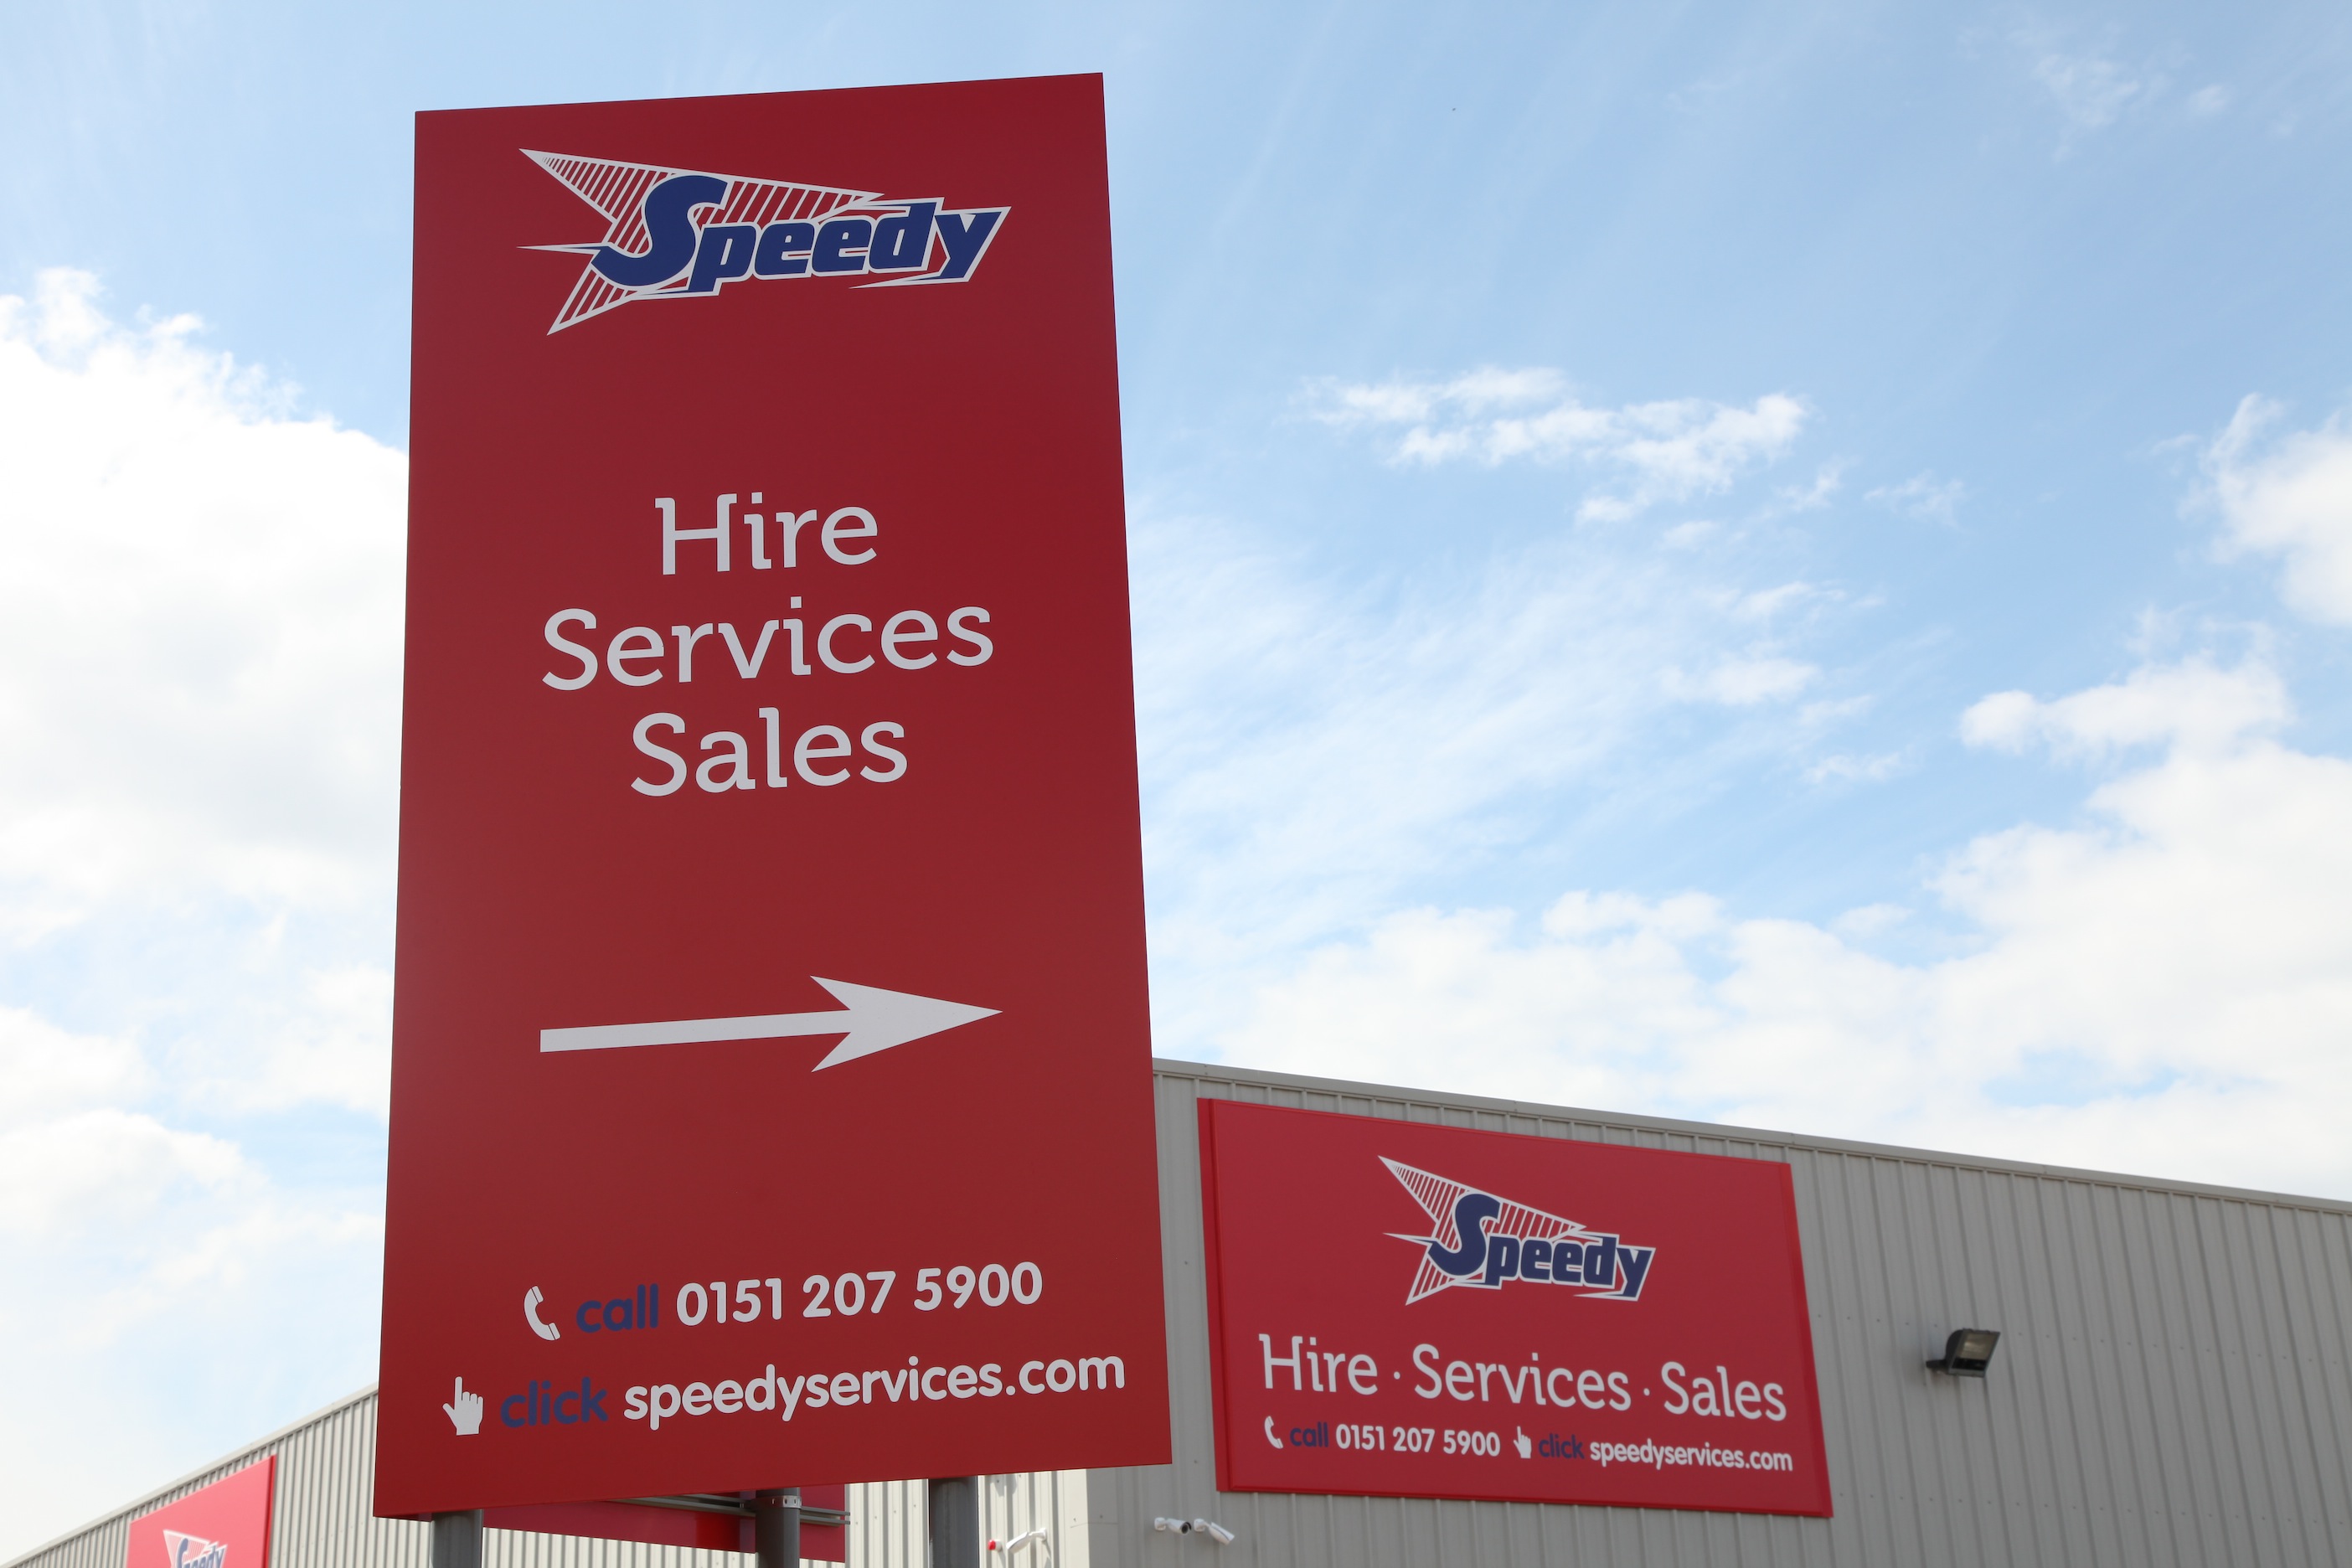 The new Speedy superstore in Liverpool